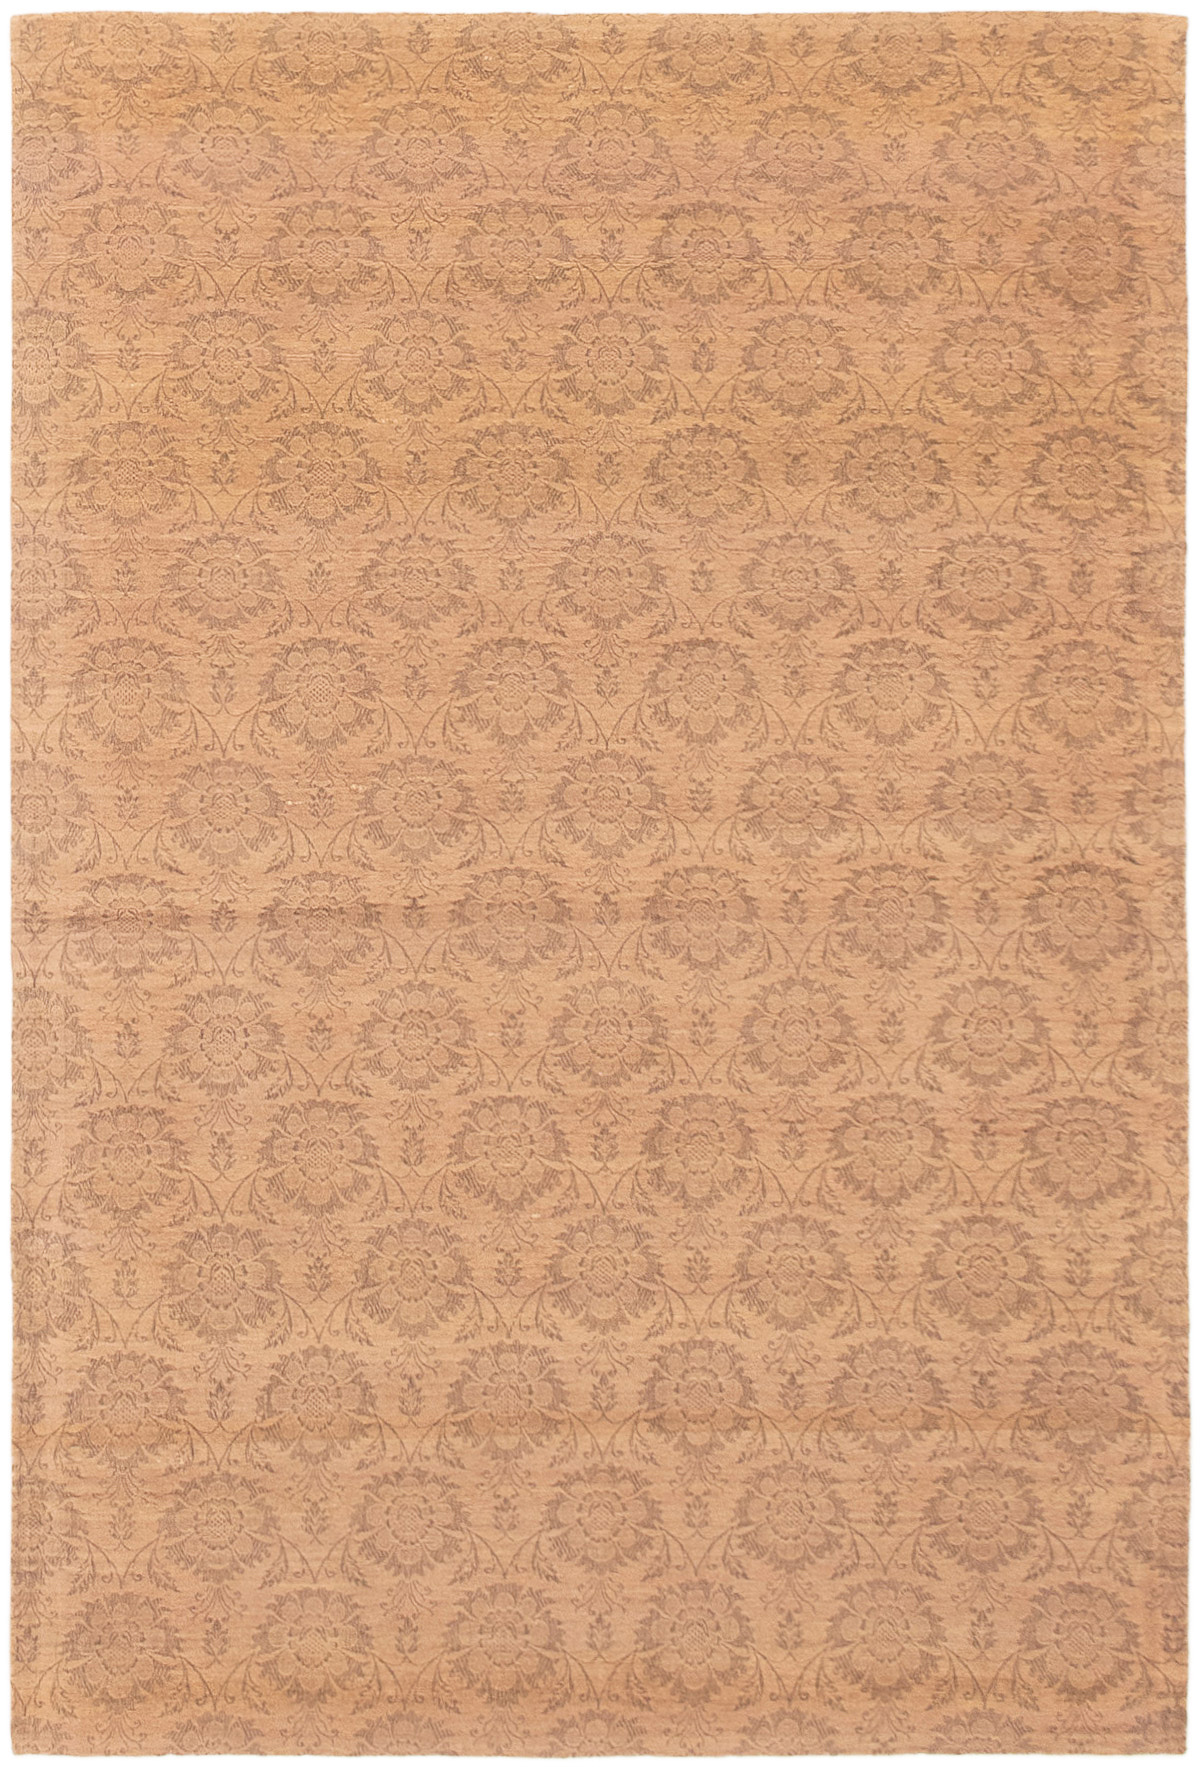 Handmade Collage Tan Chenille Rug 3'10" x 5'10" Size: 3'10" x 5'10"  